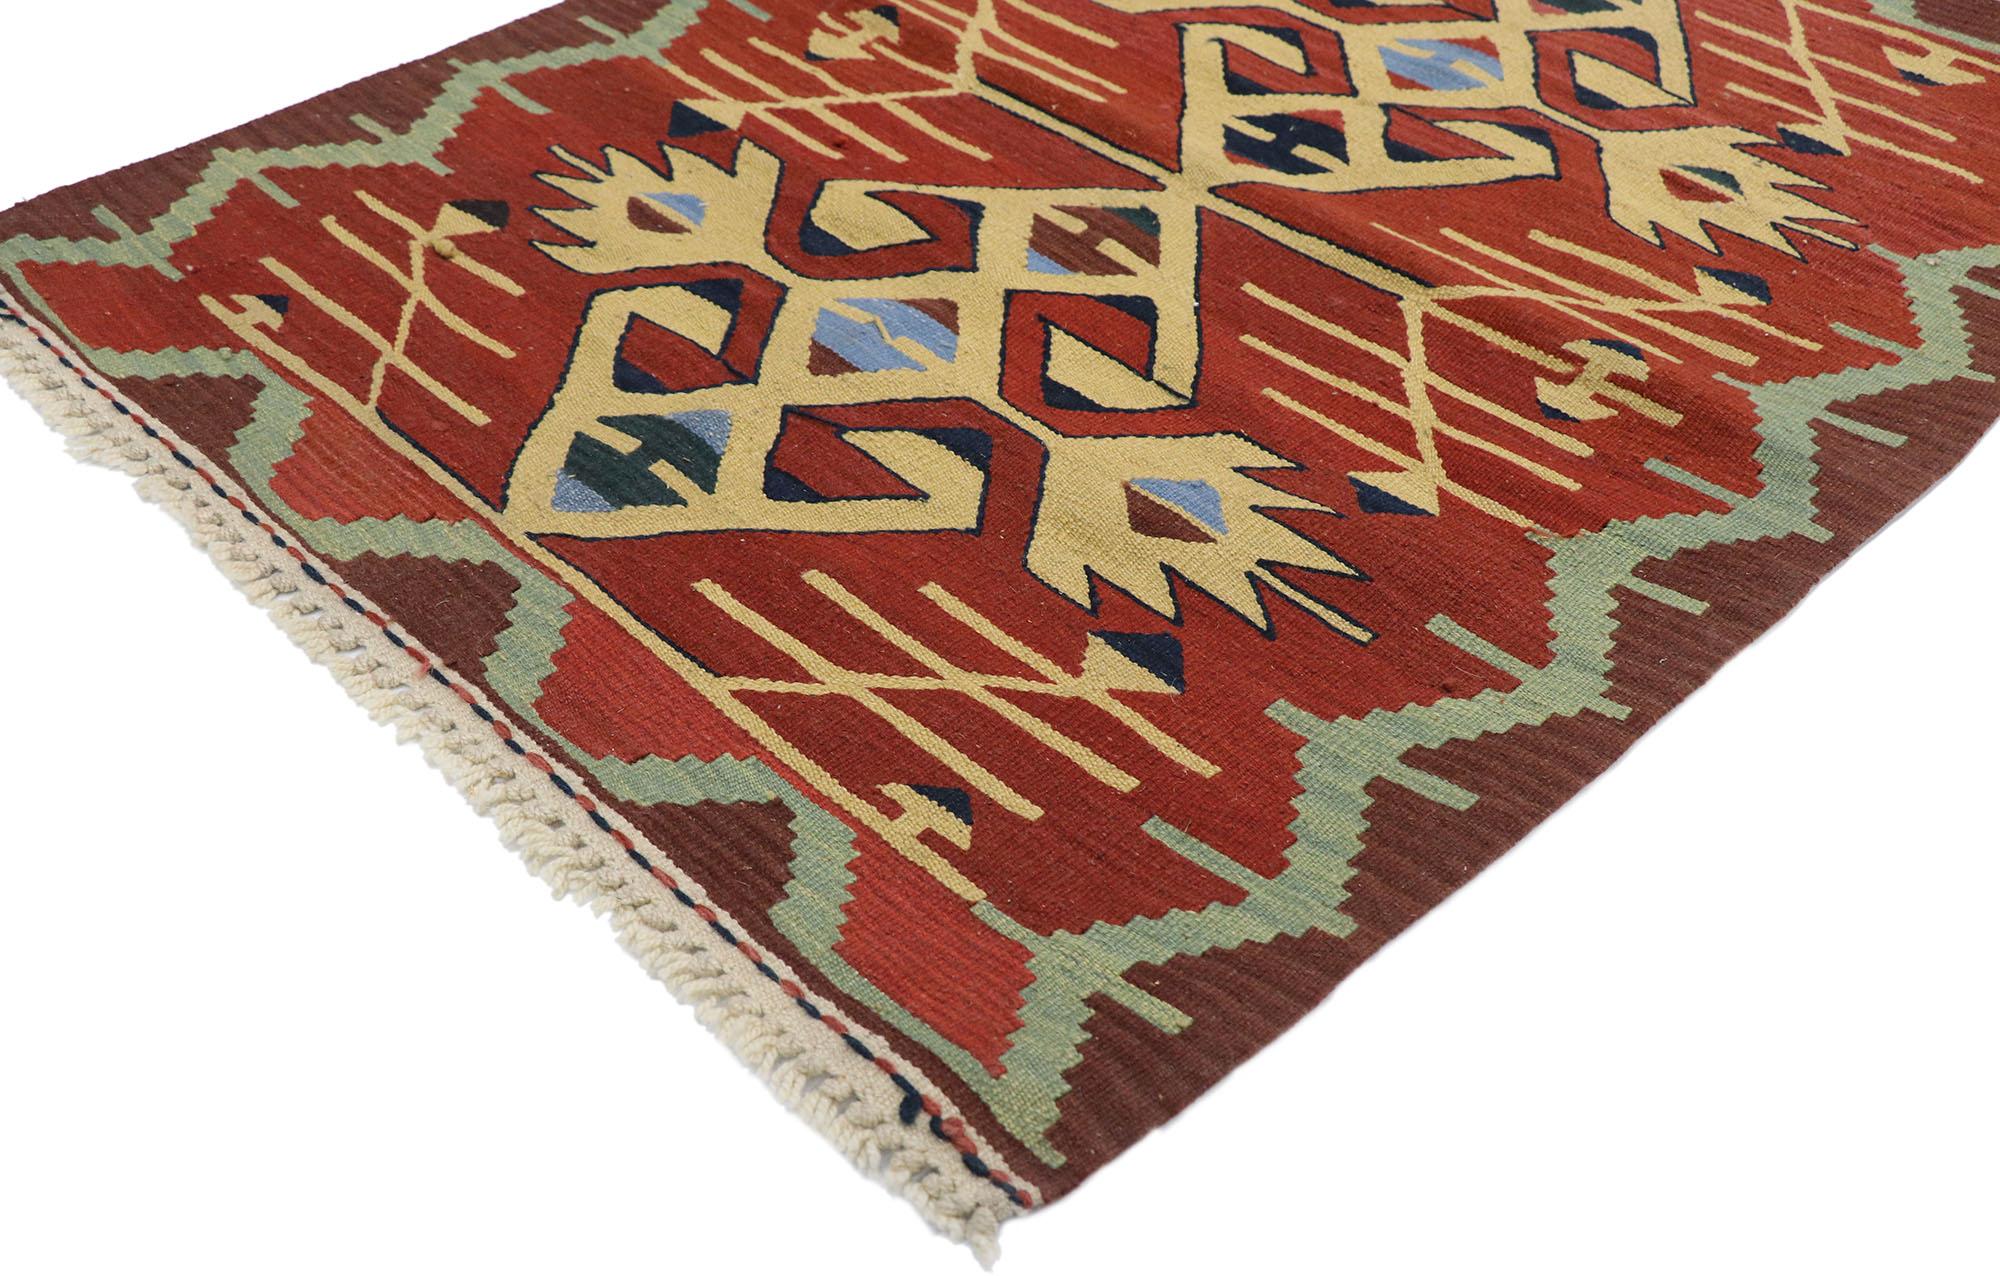 77853 Vintage Persian Shiraz Kilim rug with Tribal style 02'10 x 03'07. Full of tiny details and a bold expressive design combined with vibrant colors and tribal style, this hand-woven wool vintage Persian Shiraz kilim rug is a captivating vision of